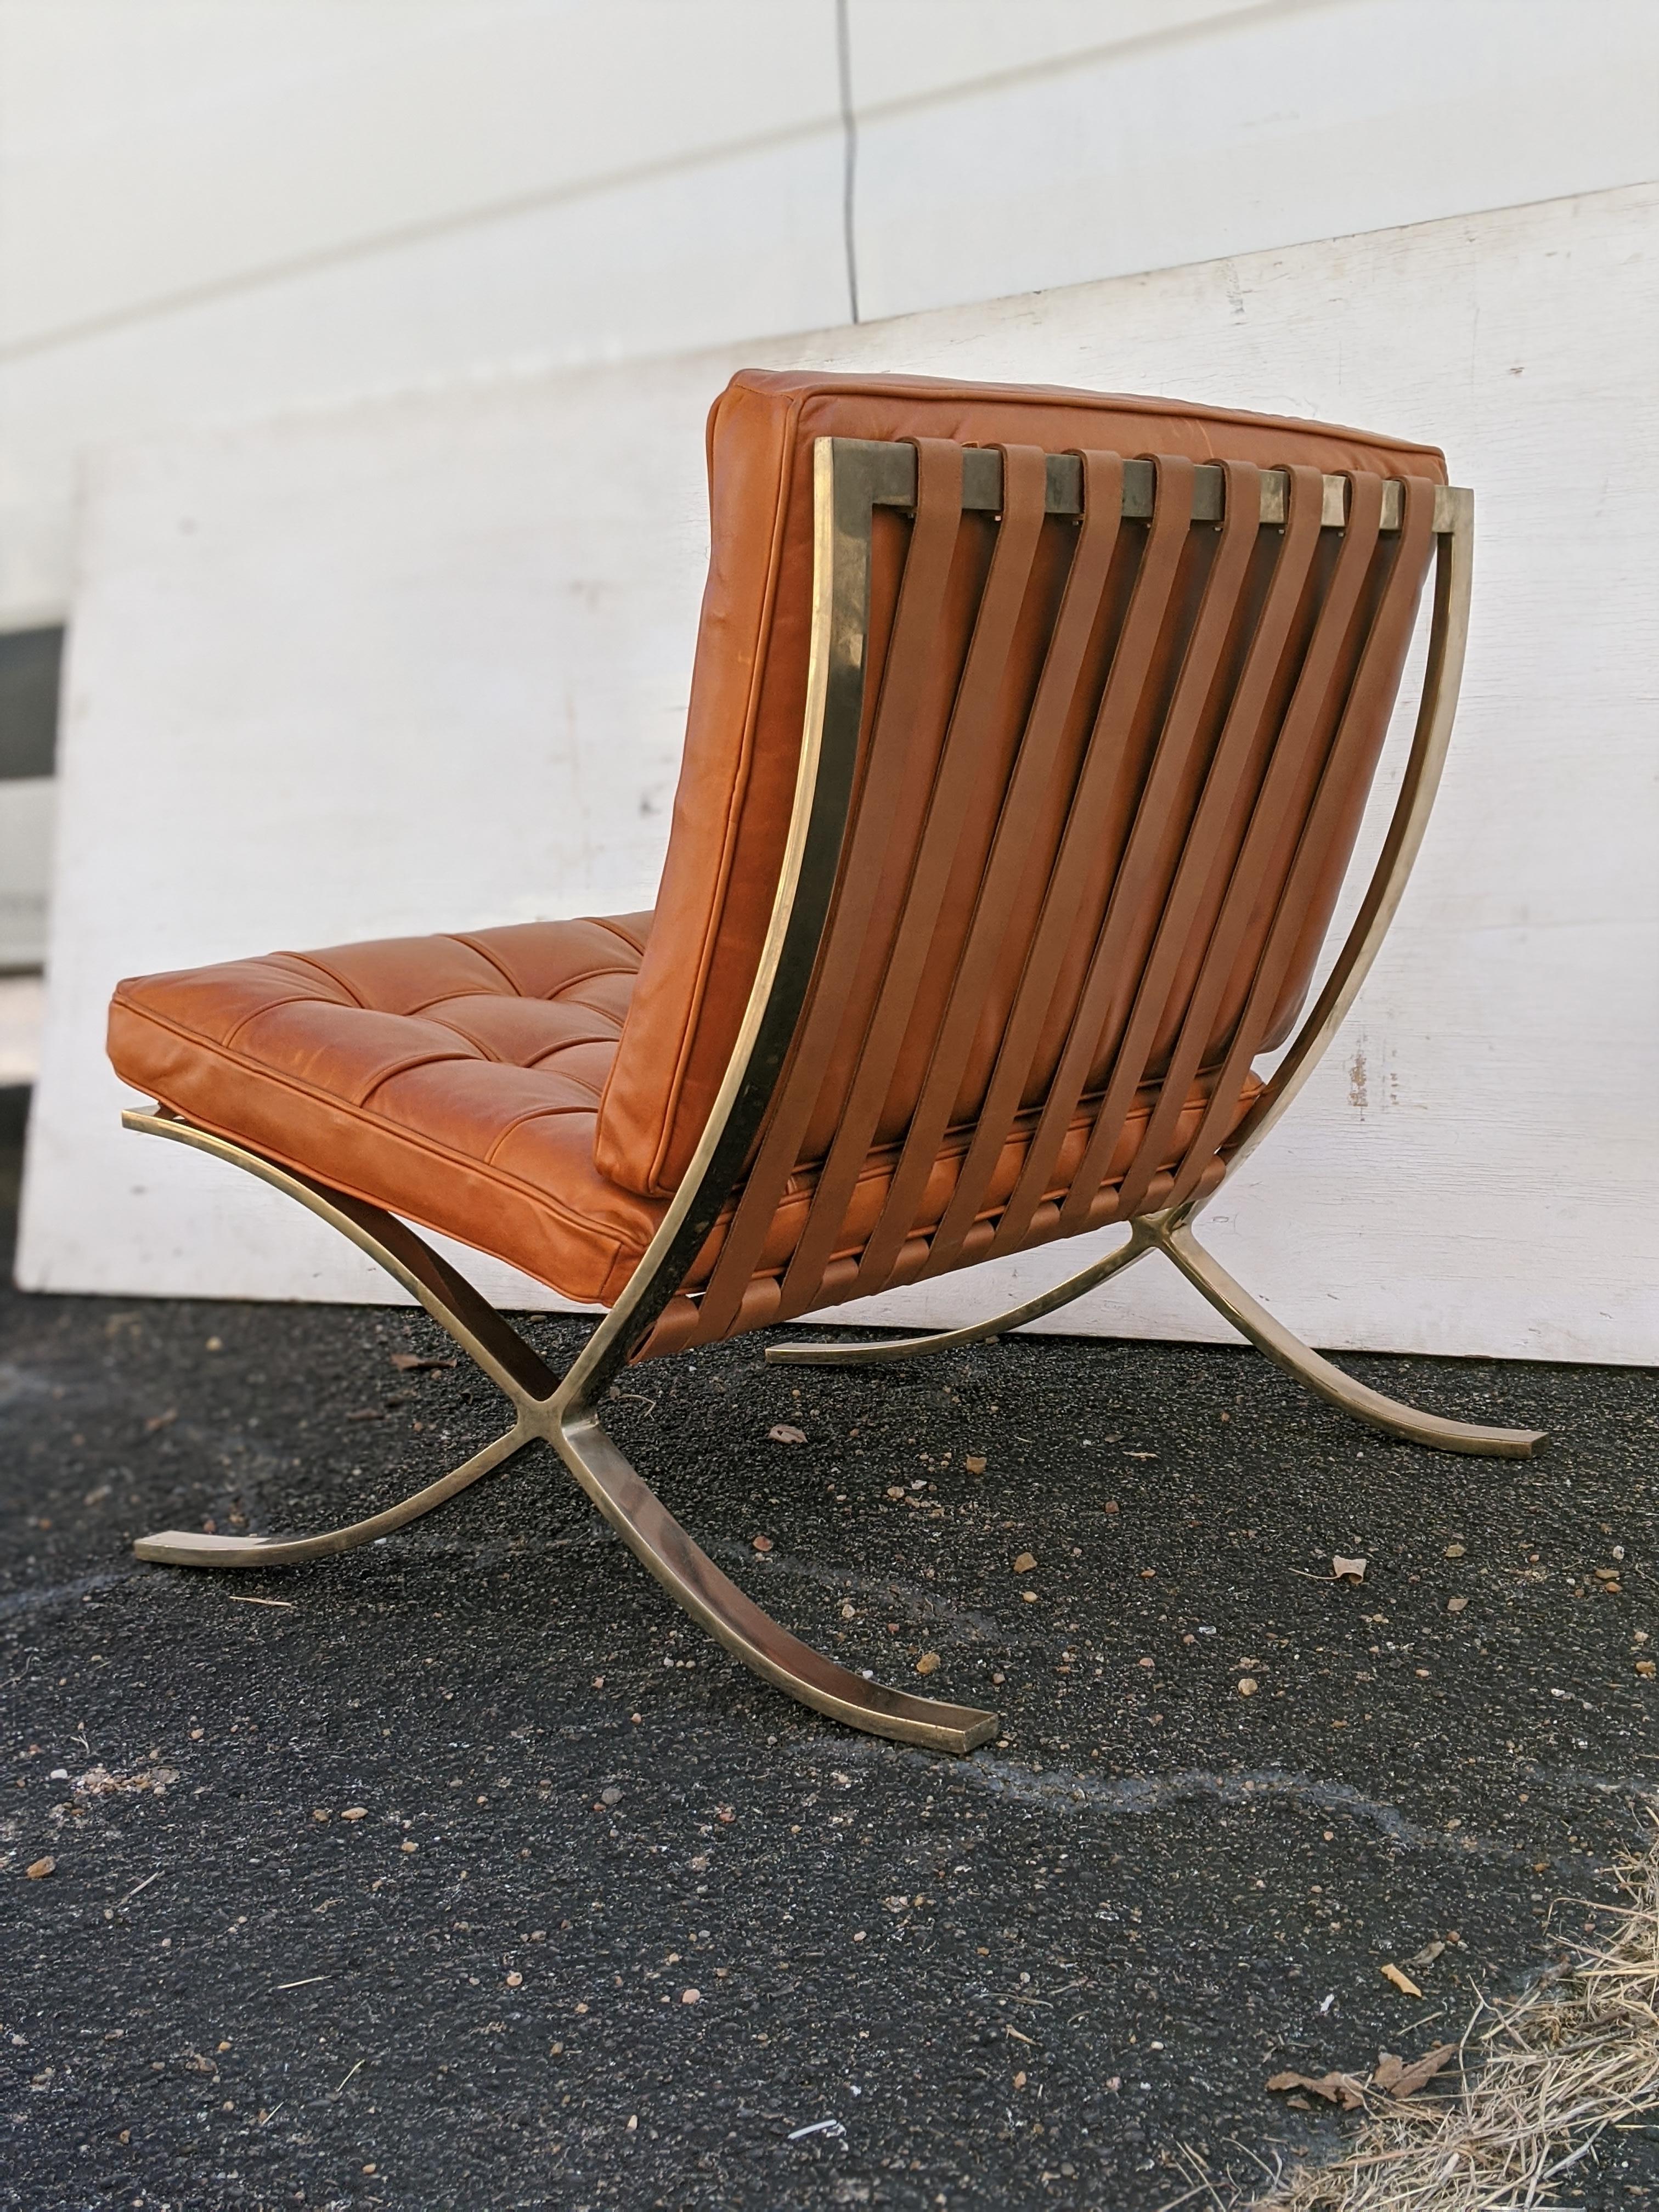 North American Pair of Vintage Brass Barcelona Chairs designed by Mies van der Rohe for Knoll